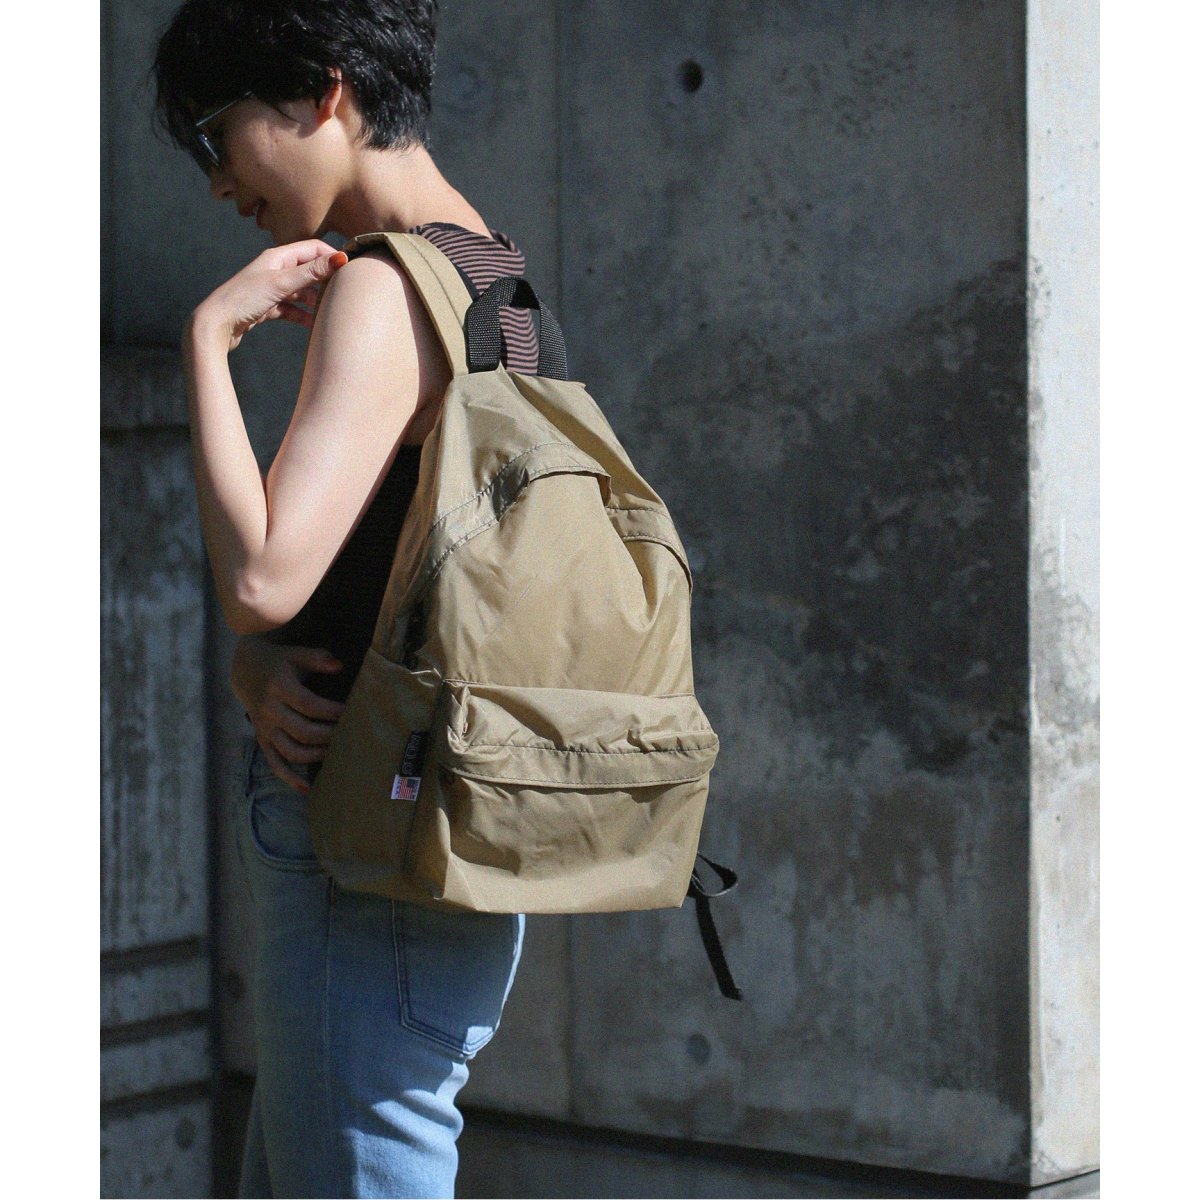 MELO/メロ】MELO BACK PACK：バックパック | ジャーナルスタンダード ...